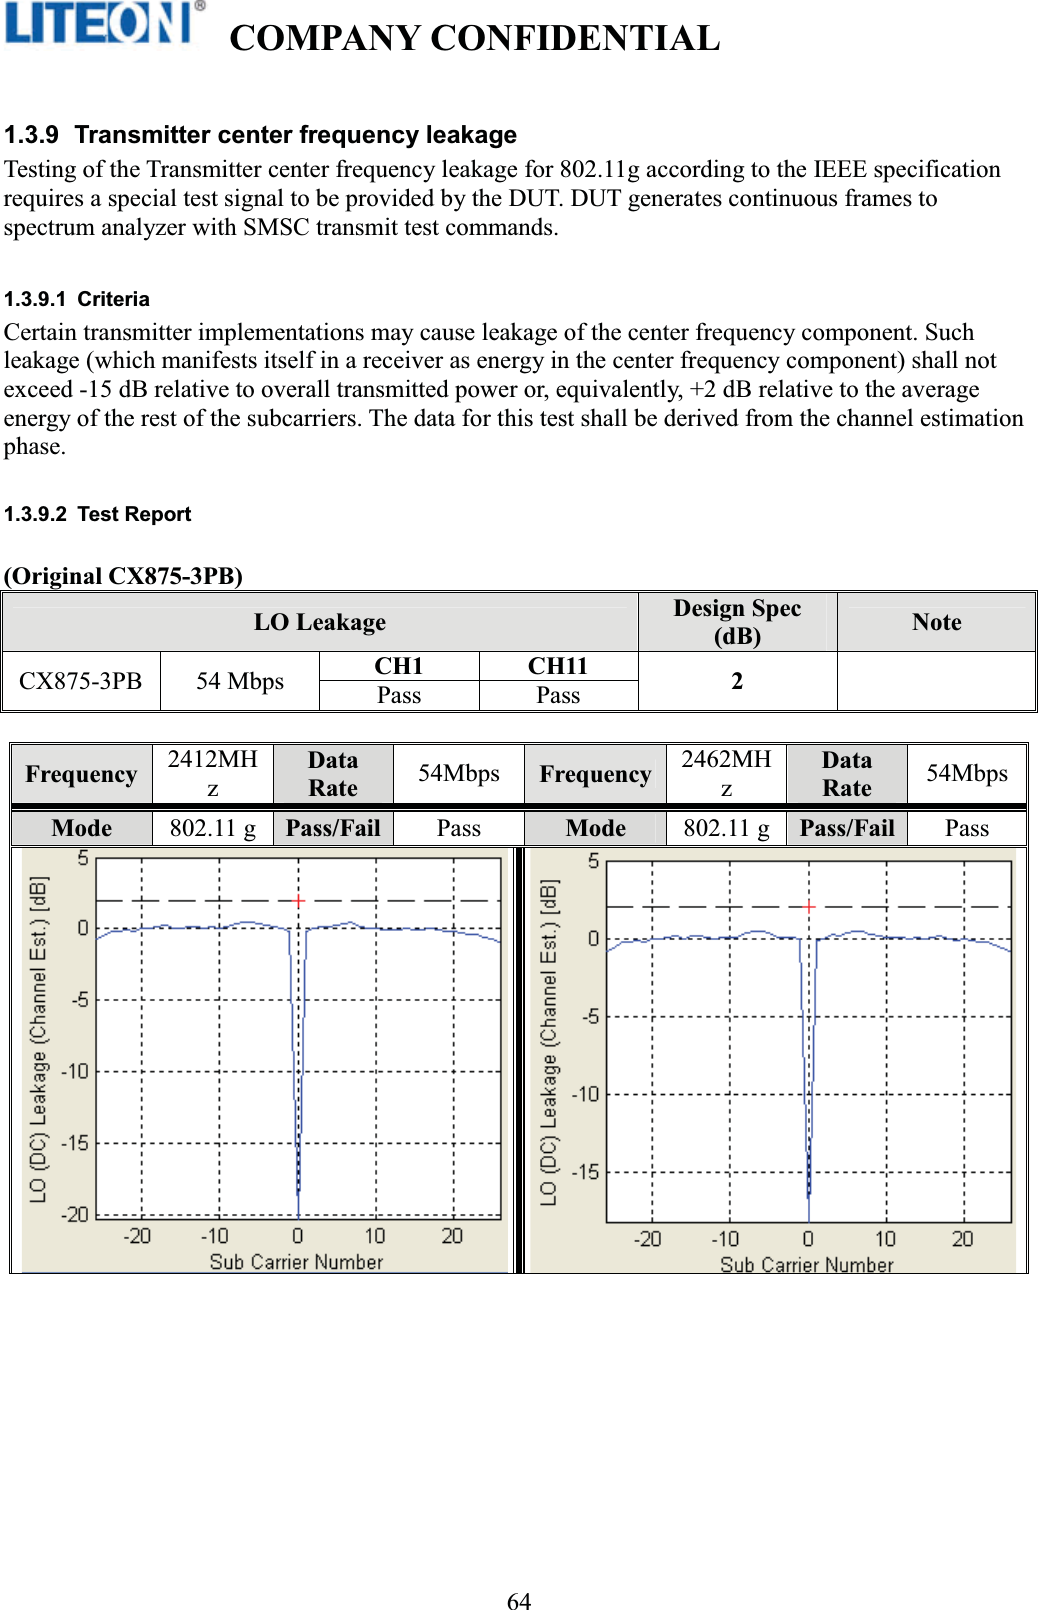   COMPANY CONFIDENTIAL   !641.3.9   Transmitter center frequency leakage Testing of the Transmitter center frequency leakage for 802.11g according to the IEEE specification requires a special test signal to be provided by the DUT. DUT generates continuous frames to spectrum analyzer with SMSC transmit test commands. 1.3.9.1 Criteria Certain transmitter implementations may cause leakage of the center frequency component. Such leakage (which manifests itself in a receiver as energy in the center frequency component) shall not exceed -15 dB relative to overall transmitted power or, equivalently, +2 dB relative to the average energy of the rest of the subcarriers. The data for this test shall be derived from the channel estimation phase. 1.3.9.2 Test Report (Original CX875-3PB) LO Leakage  Design Spec (dB)  Note CX875-3PB 54 Mbps  CH1 CH11  2  Pass Pass Frequency 2412MHz Data Rate  54Mbps  Frequency 2462MHz Data Rate  54MbpsMode  802.11 g Pass/Fail Pass  Mode 802.11 g Pass/Fail Pass 